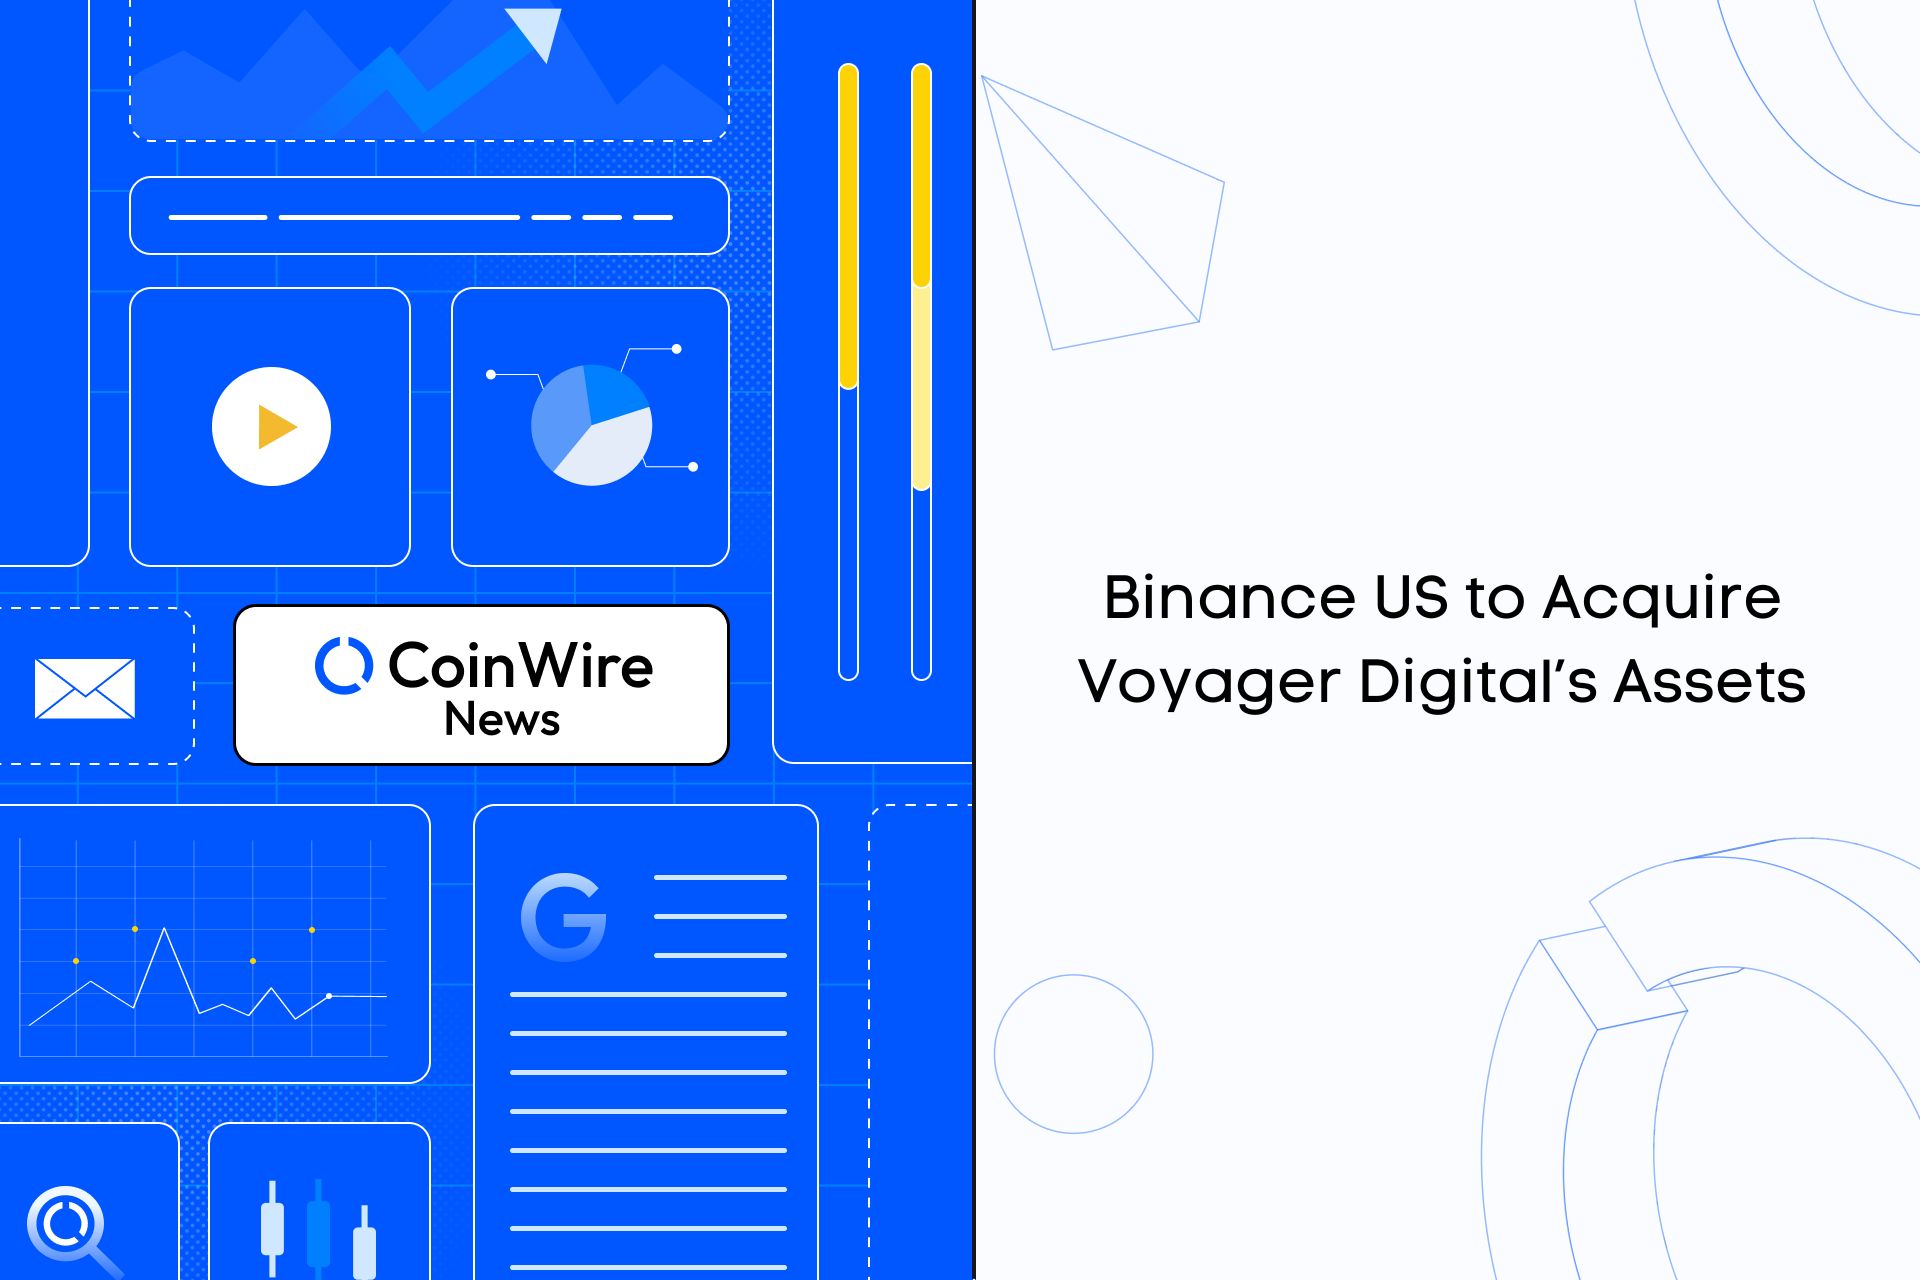 Binance Us To Acquire Voyager Digital’s Assets